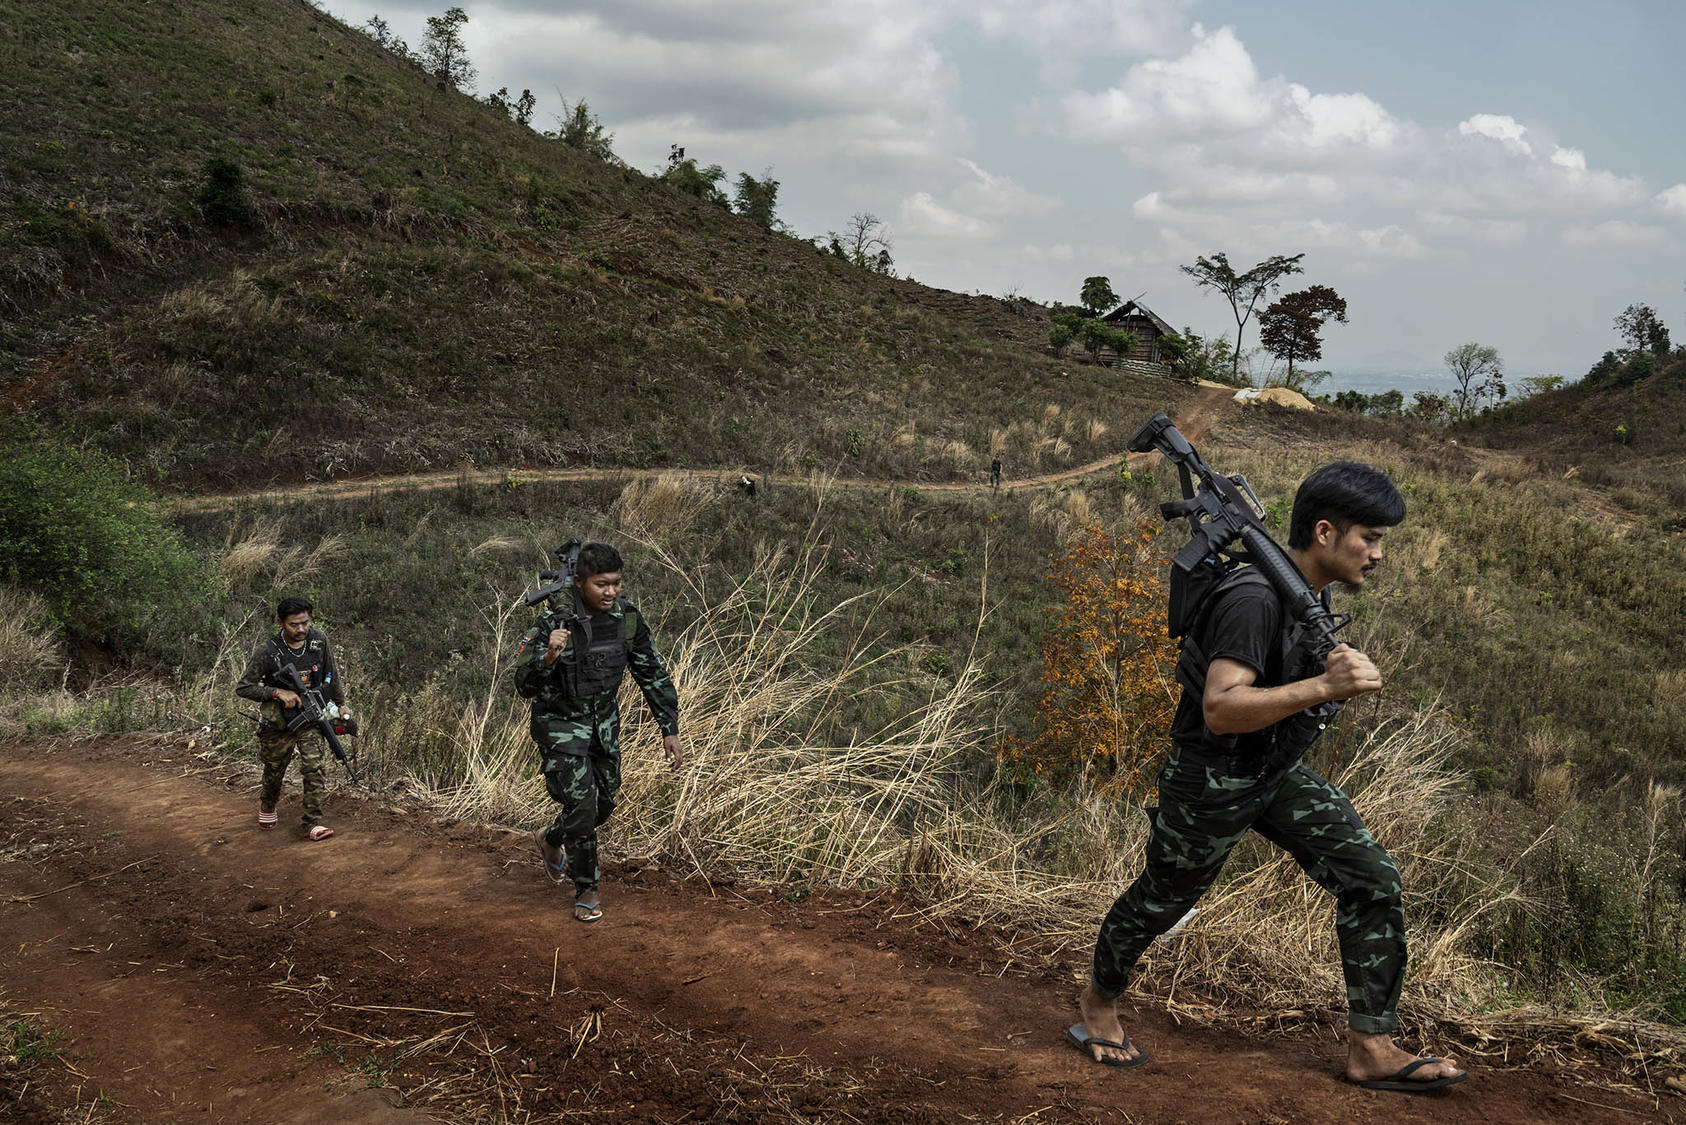 Rebel militia fighters of the People’s Defense Forces patrol a front line area near government military positions in the Kayin State of Myanmar. March 9, 2022. (Adam Dean/The New York Times)